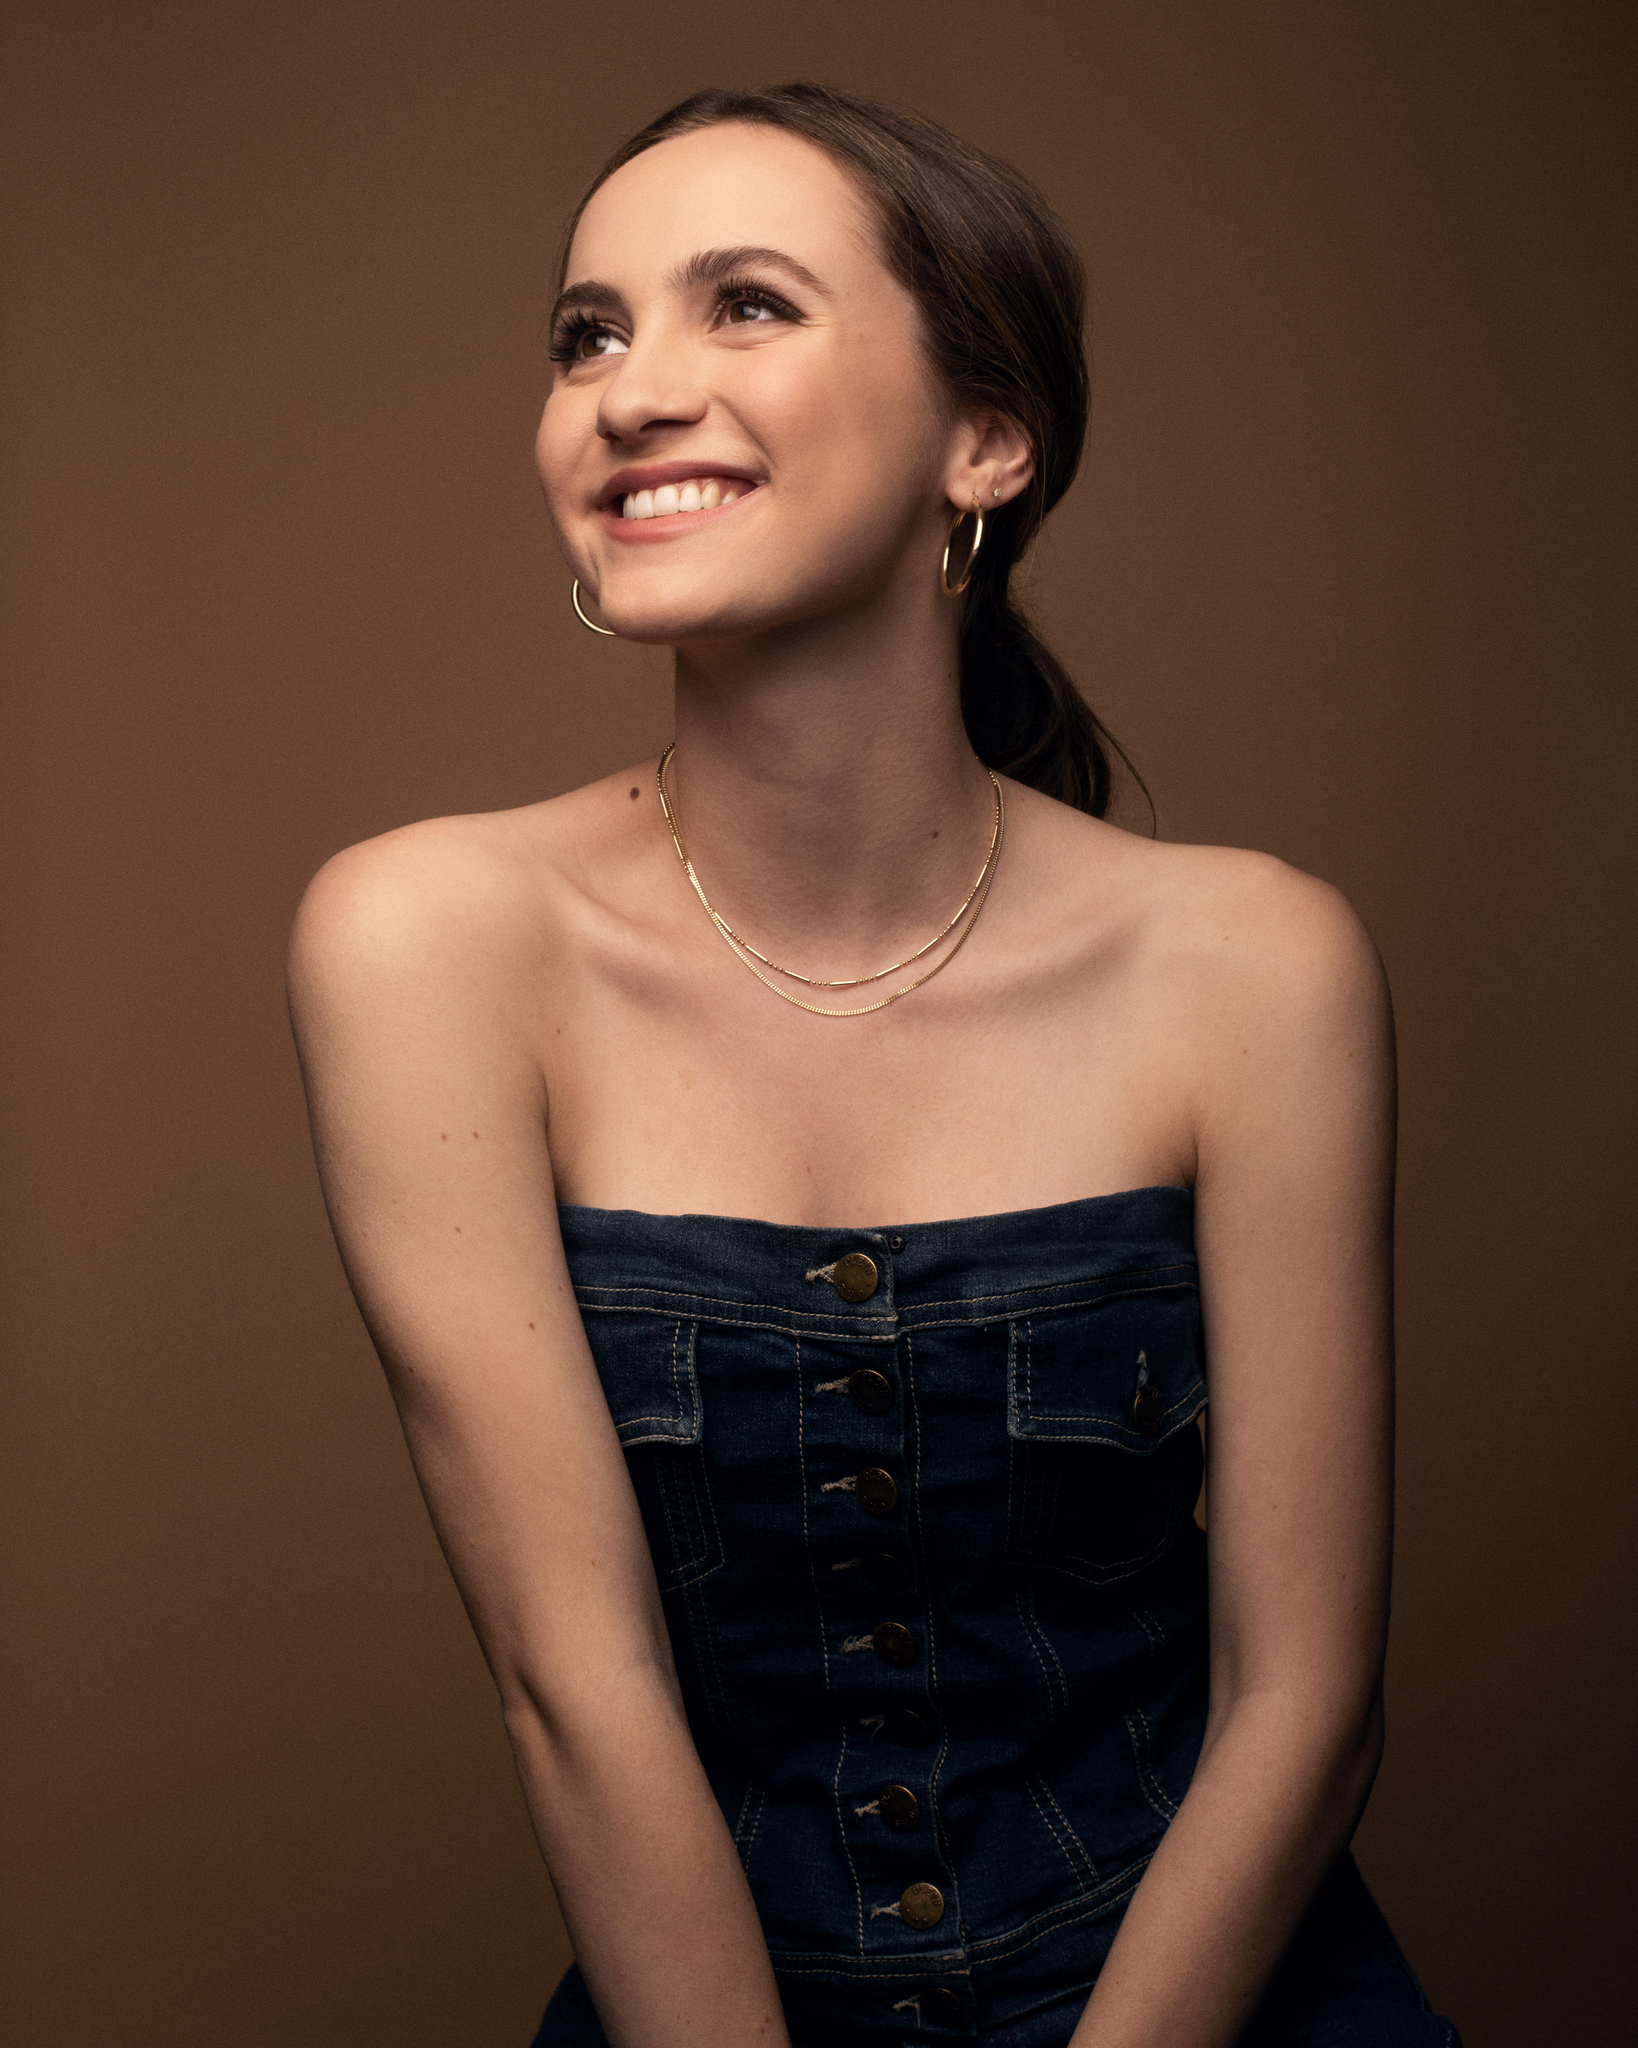 Maude Apatow 2019 Wallpapers